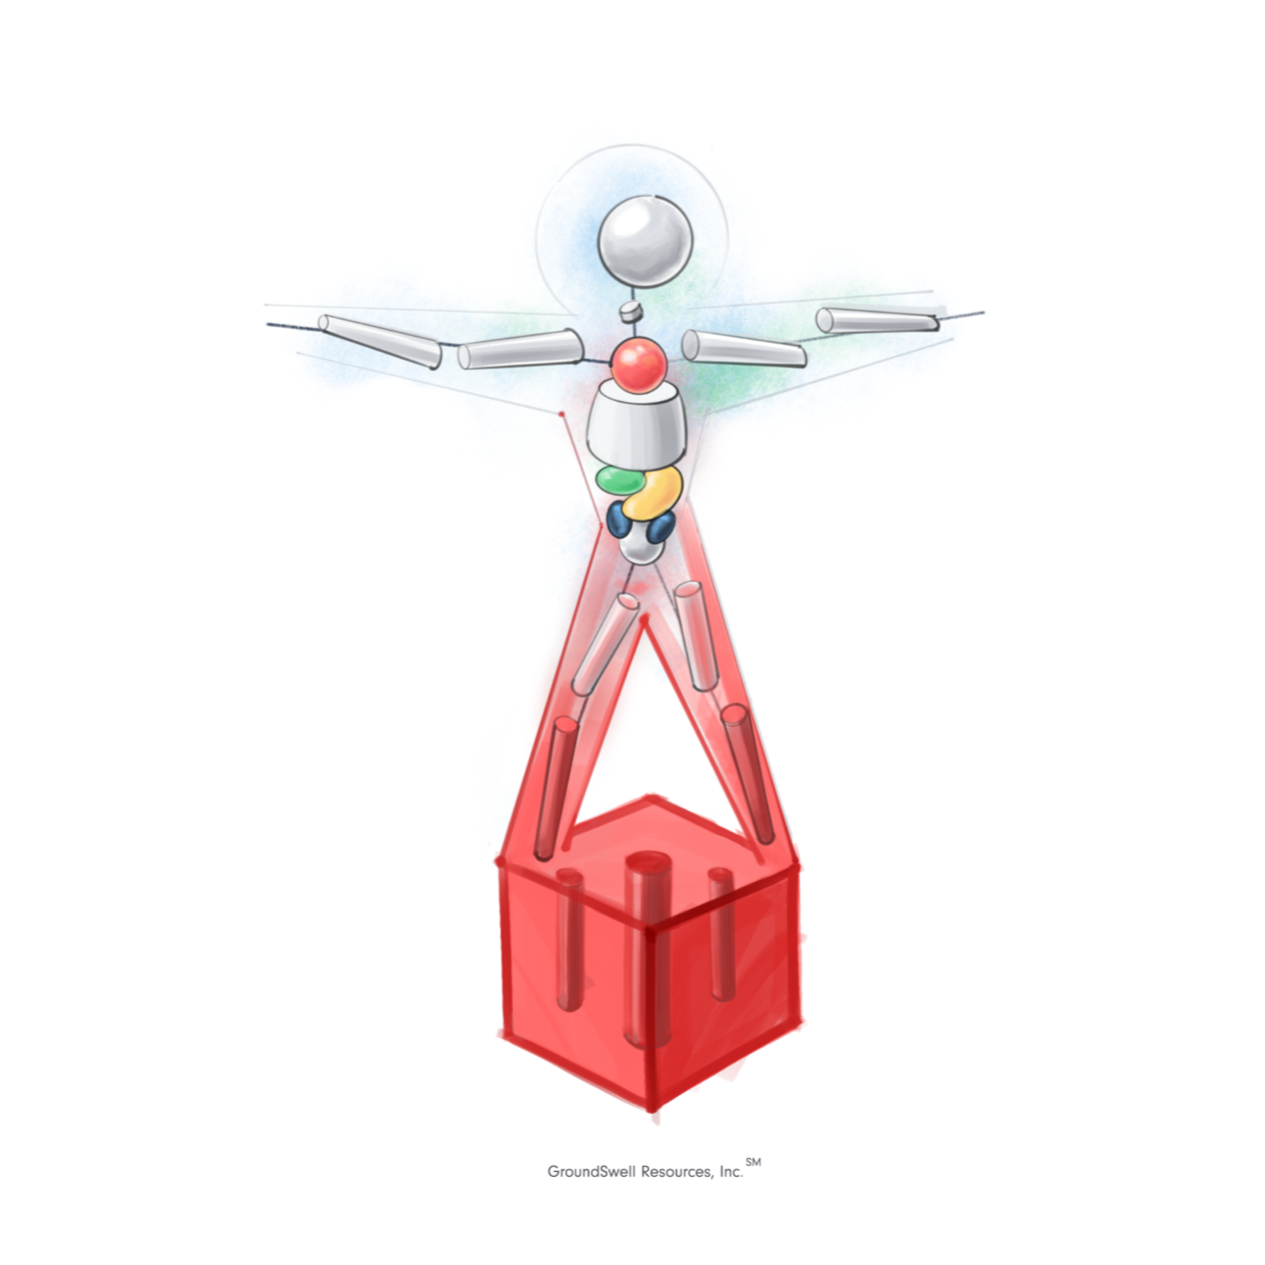 An illustration of a stick figure standing on-top of a red cube